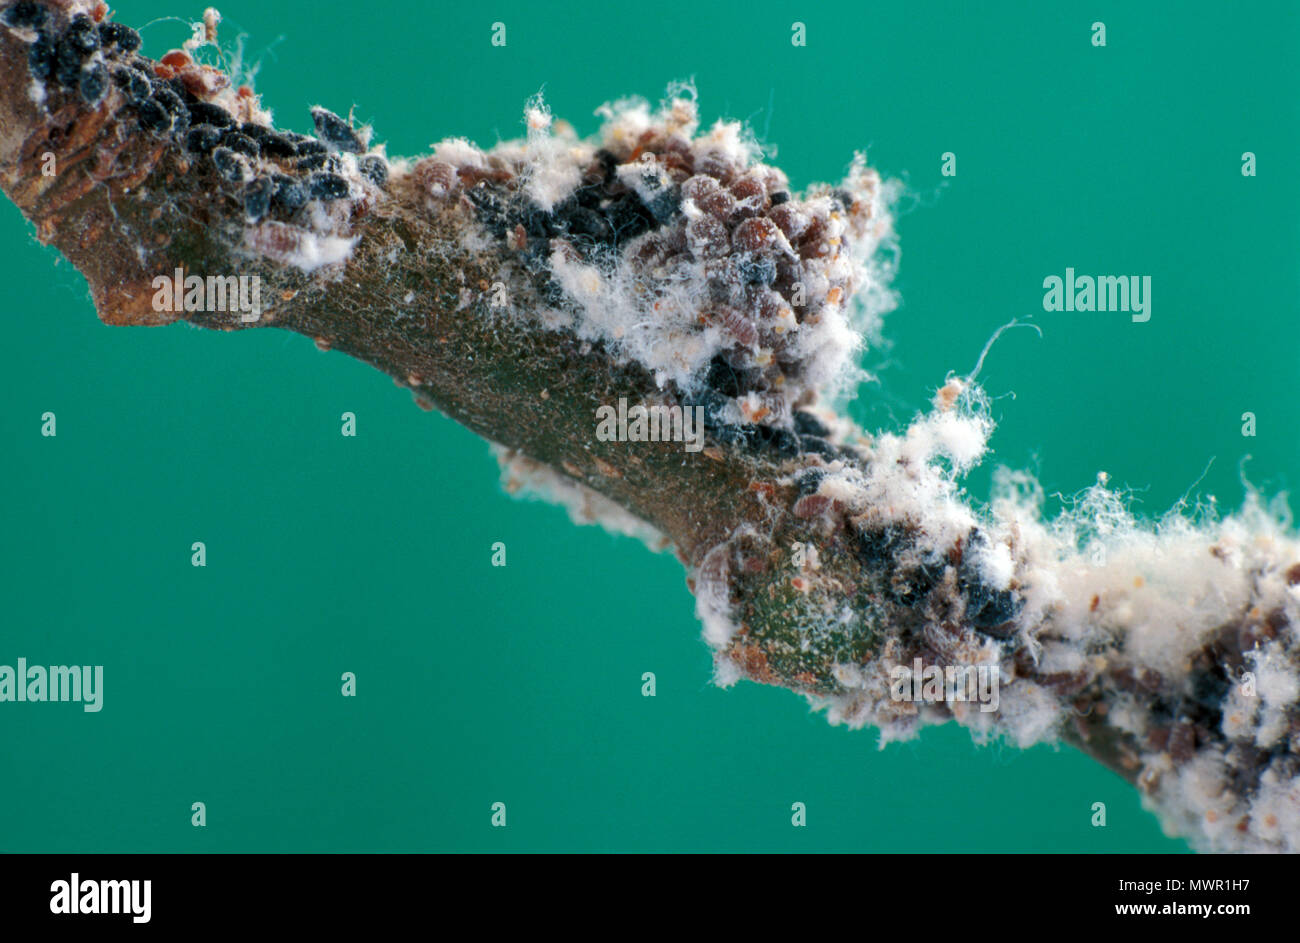 WOOLLY APHIDS ON BRANCH OF AN APPLE TREE (MALUS). are sucking insects that live on plant fluids and produce a filamentous waxy white covering. Stock Photo